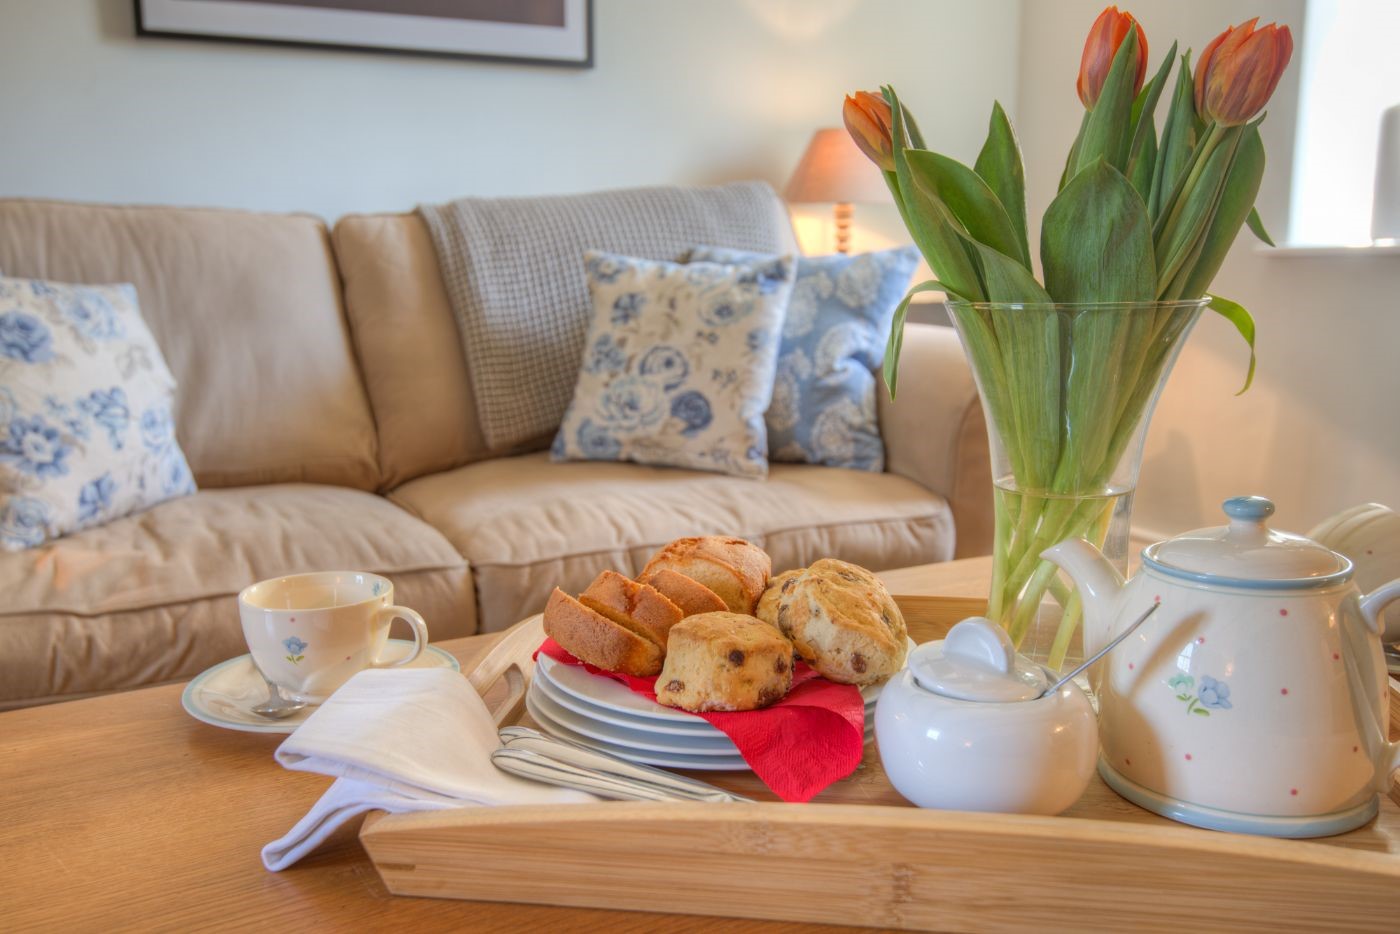 Grove House - enjoy a slice of cake and a cup of tea in the sitting room